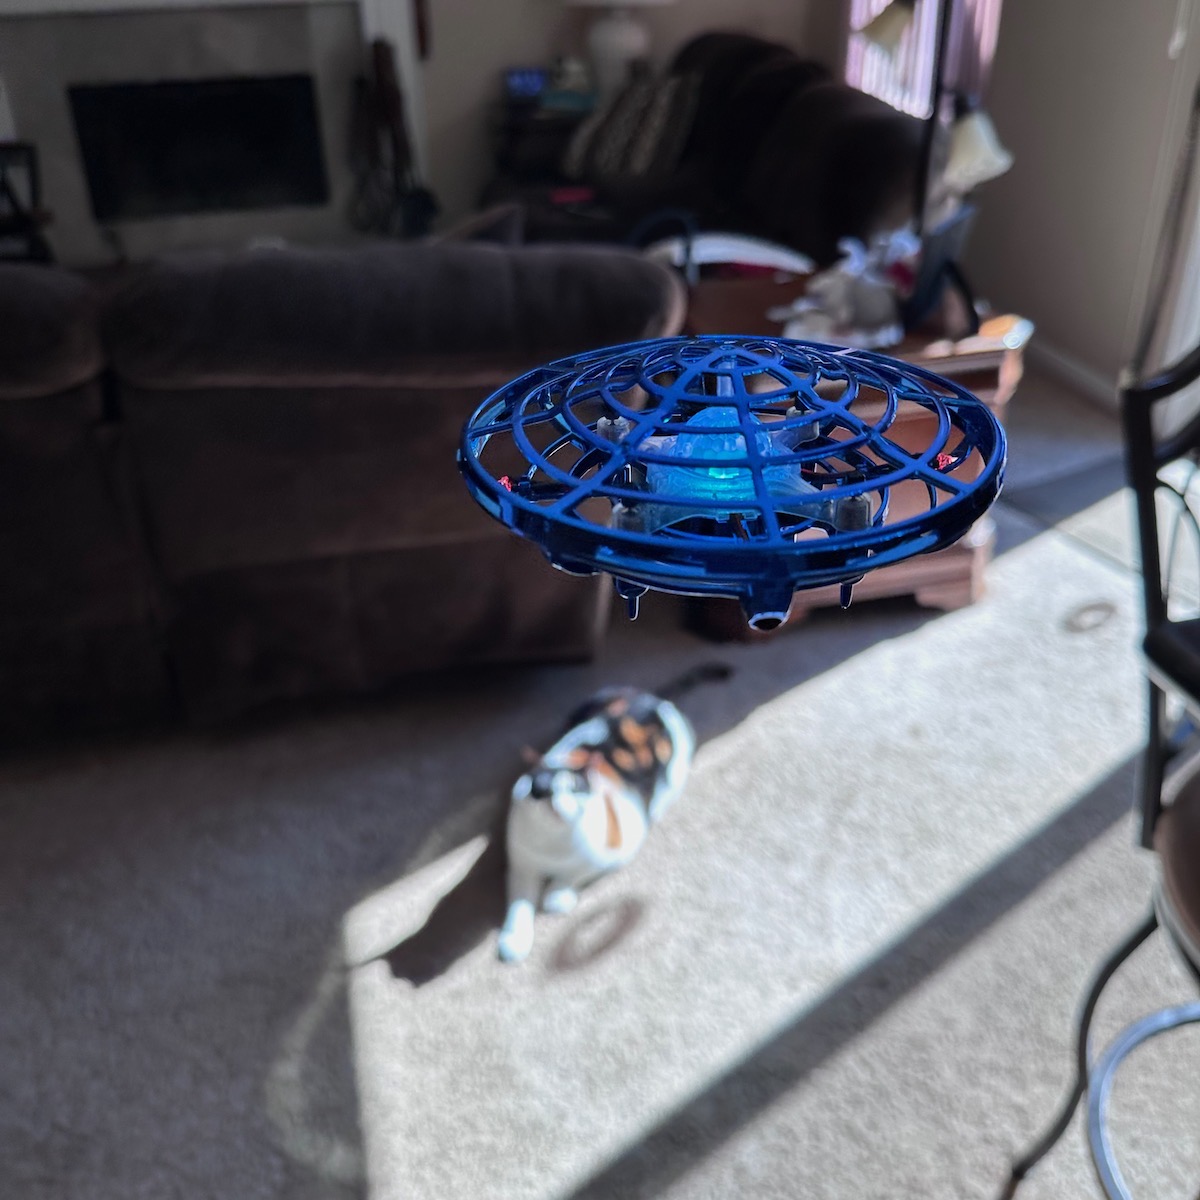 Scoot Drone with Cat Looking Up